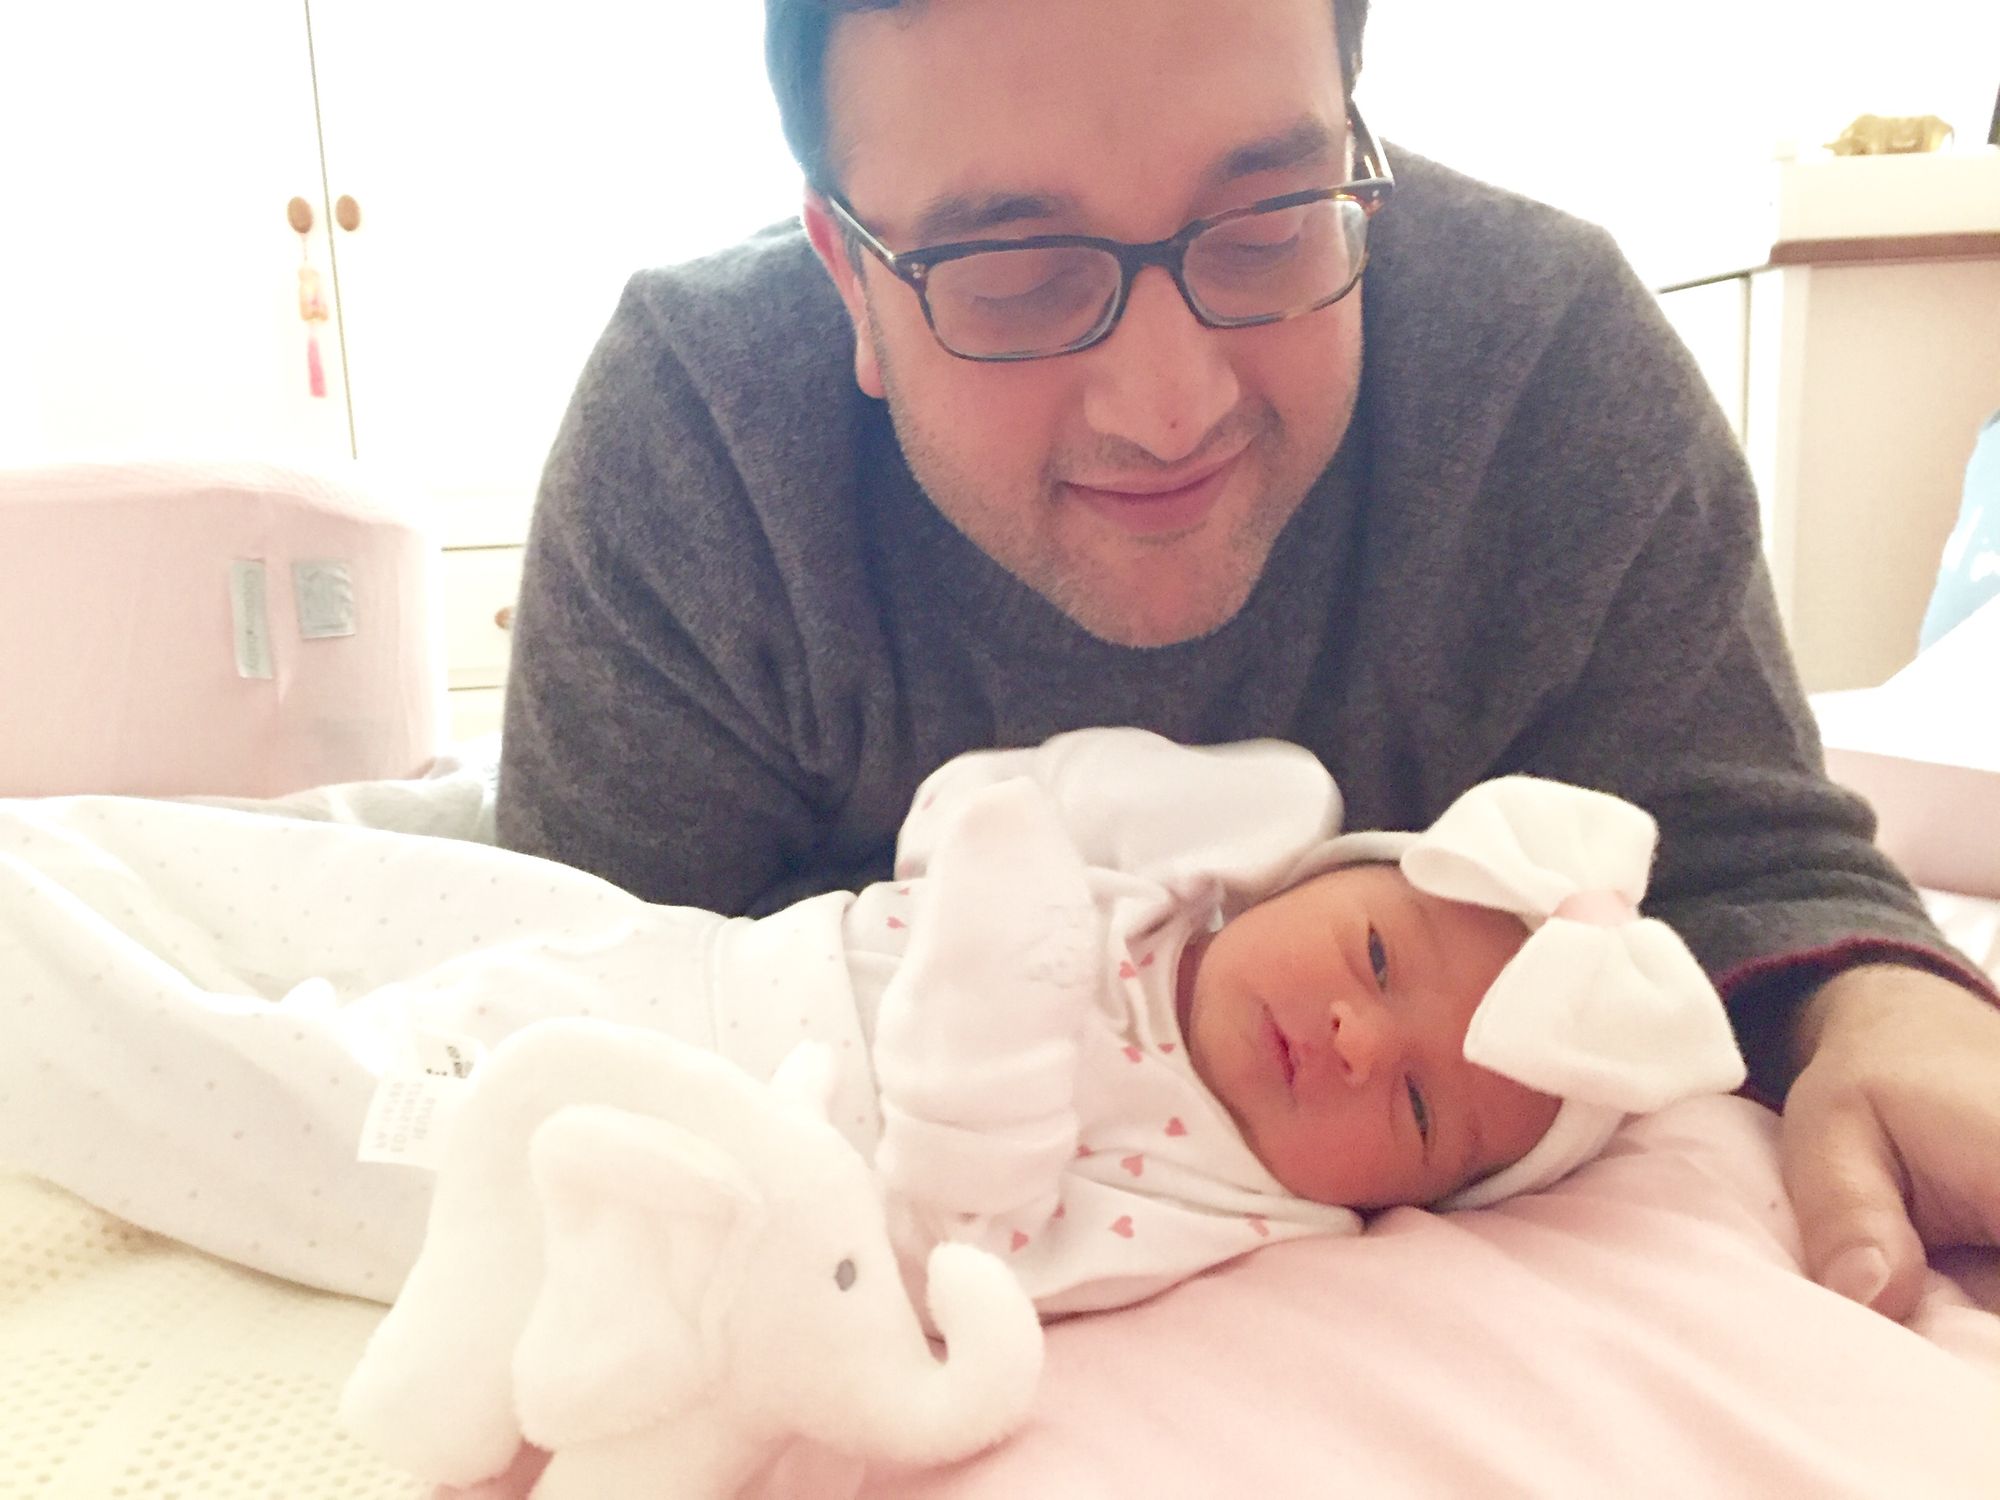 Swaroop with his baby girl